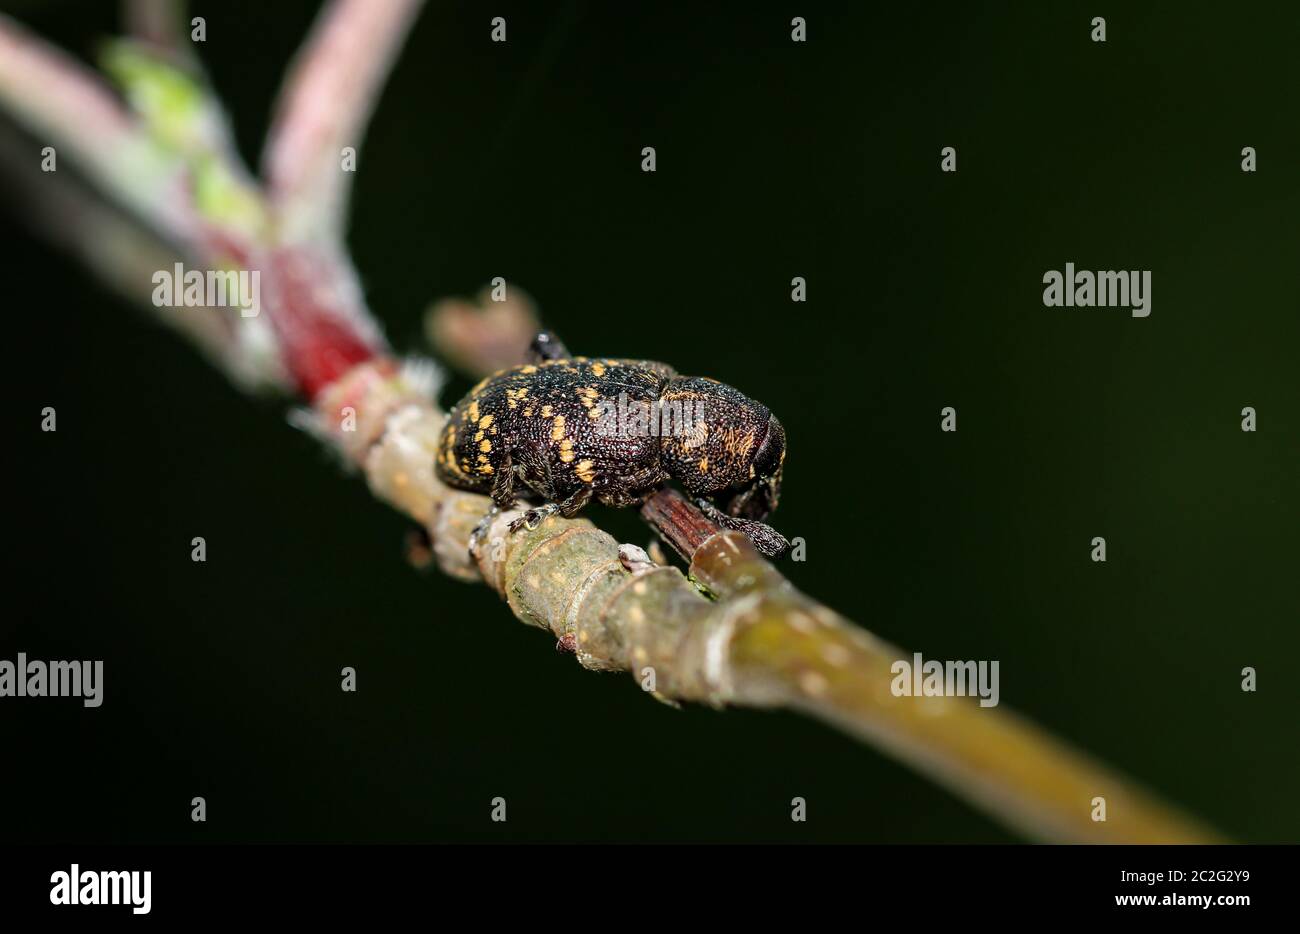 Close-up of a weevil beetle on a plant Stock Photo